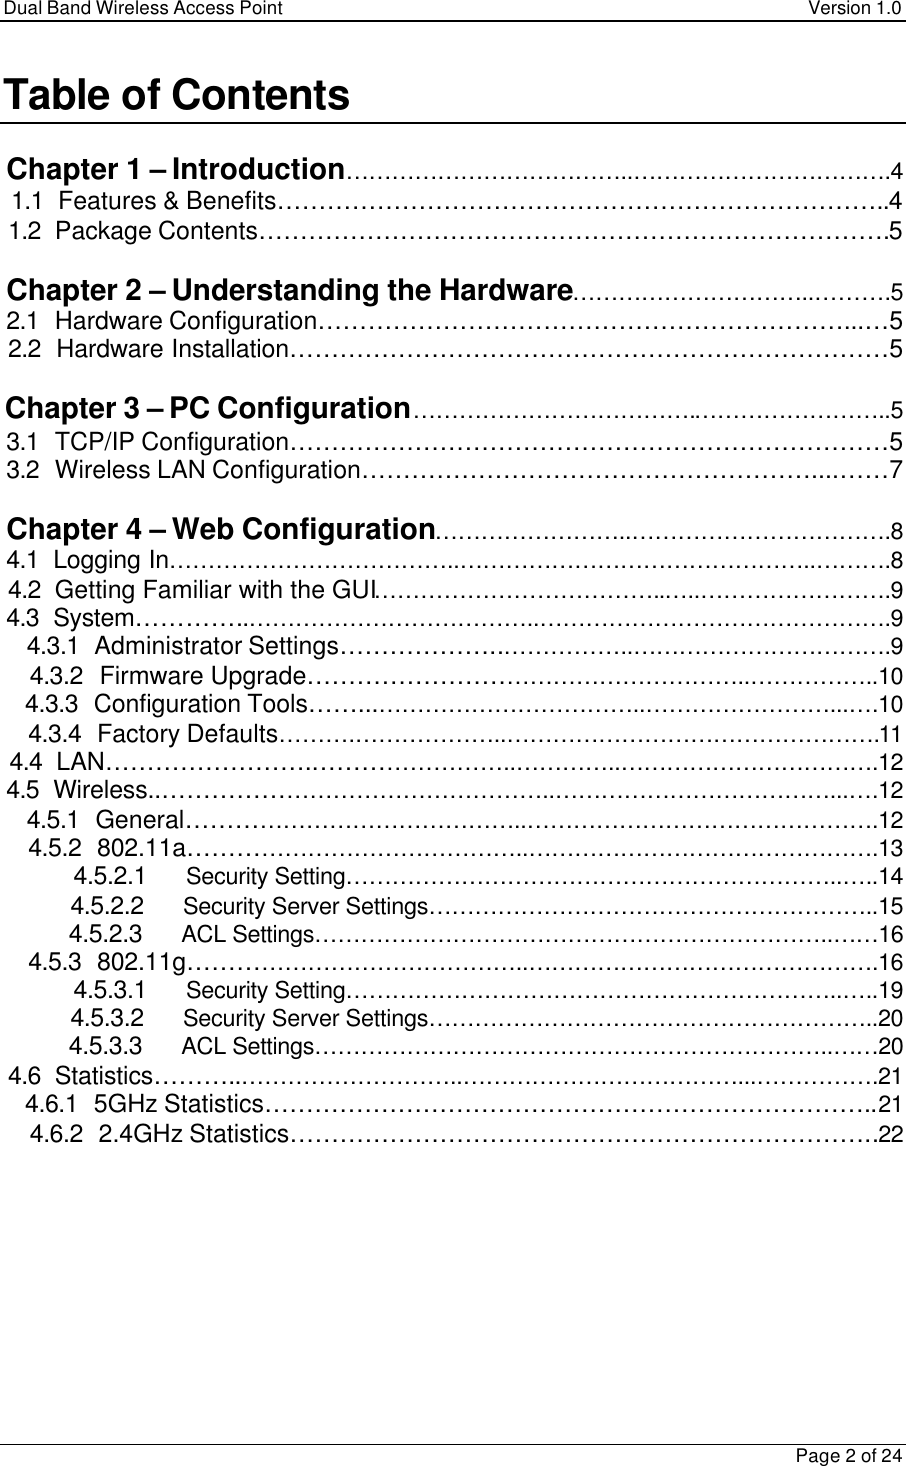 Dual Band Wireless Access Point Version 1.0Page 2 of 24Table of ContentsChapter 1 – Introduction………………………………..…………………………….41.1 Features &amp; Benefits………………………………………………………………..41.2 Package Contents………………………………………………………………….5Chapter 2 – Understanding the Hardware…………………………..……….52.1 Hardware Configuration………………………………………………………...…52.2 Hardware Installation………………………………………………………………5Chapter 3 – PC Configuration……………………………….……………………..53.1 TCP/IP Configuration………………………………………………………………53.2 Wireless LAN Configuration………………………………………………....……7Chapter 4 – Web Configuration……………………..…………………………….84.1 Logging In………………………………..………………………………………..……….84.2 Getting Familiar with the GUI………………………………..…..…………………….94.3 System…………..………………………………..……………………………………….94.3.1   Administrator Settings………………..……………..…………………………….94.3.2   Firmware Upgrade………………………………………………..……………..104.3.3   Configuration Tools……...……………………………..……………………...….104.3.4   Factory Defaults……….………………..………………………………………….114.4 LAN…………………….……………………..…………..…………………………….124.5 Wireless..…………………………………………..………………………………...….124.5.1   General……………………………………..……………………………………….124.5.2   802.11a……………………………………..……………………………………….134.5.2.1 Security Setting………………………………………………………..…..144.5.2.2 Security Server Settings…………………………………………………..154.5.2.3 ACL Settings…………………………………………………………..……164.5.3   802.11g……………………………………..……………………………………….164.5.3.1 Security Setting………………………………………………………..…..194.5.3.2 Security Server Settings…………………………………………………..204.5.3.3 ACL Settings…………………………………………………………..……204.6 Statistics………..………………………..………………………………...…………….214.6.1   5GHz Statistics………………………………………………………………..214.6.2   2.4GHz Statistics……………………………………………………………..22